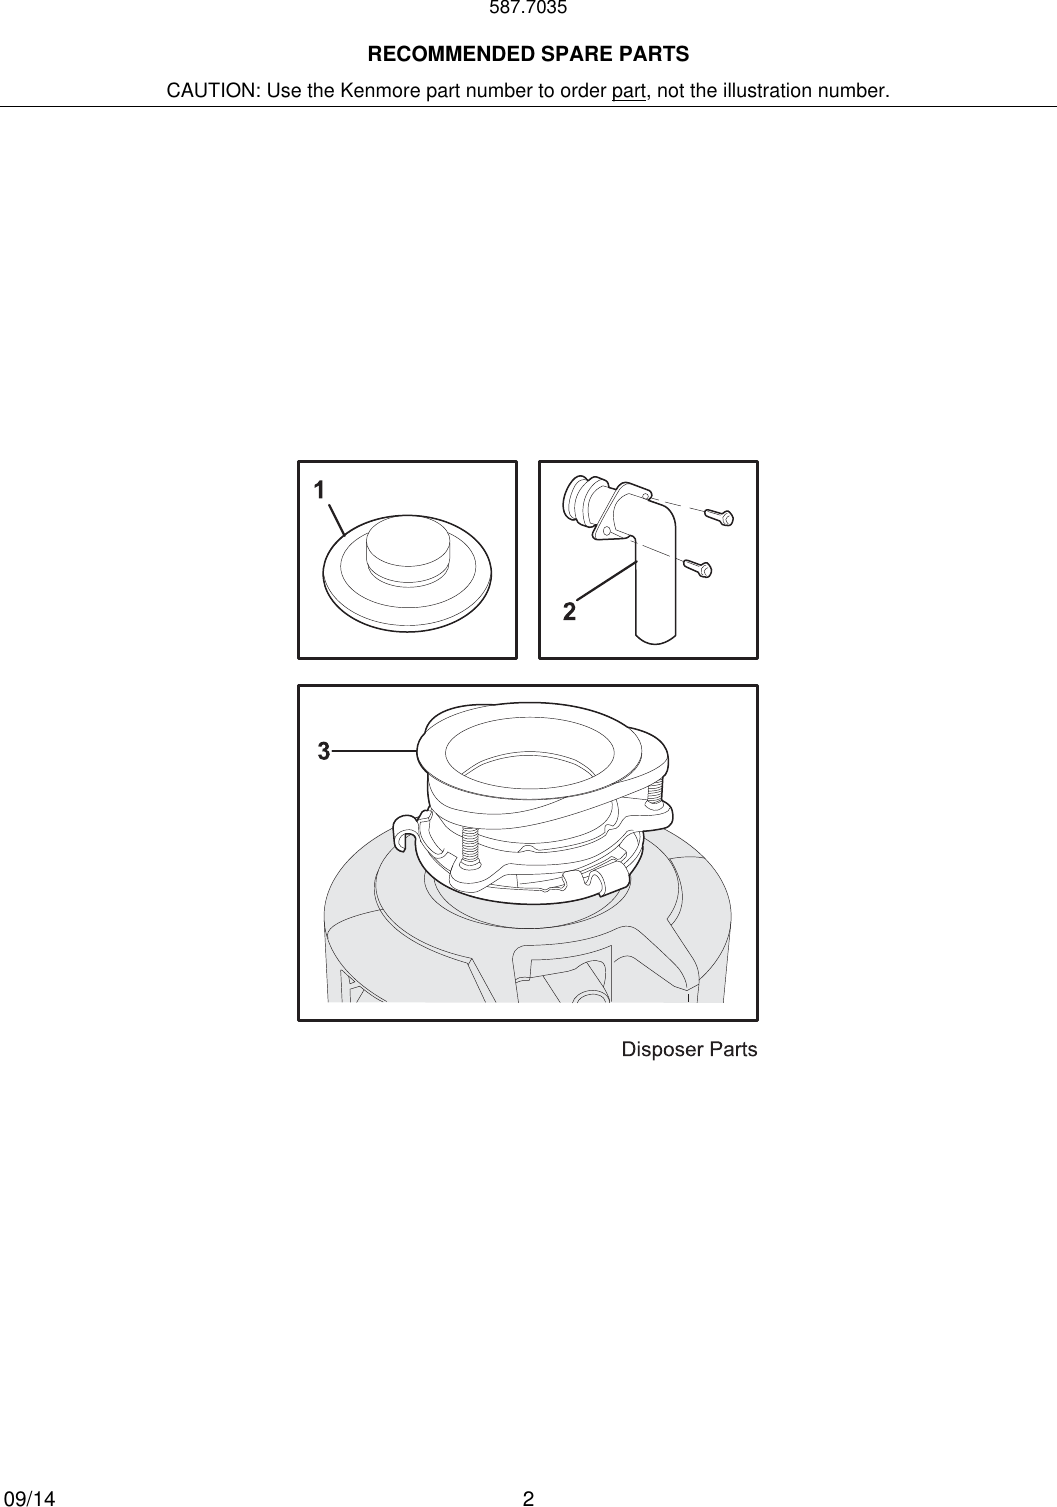 Page 2 of 4 - Kenmore Kenmore-Kenmore-3-4-Horsepower-Standard-Disposer-Cool-Gray-Parts-Manual 5995650792